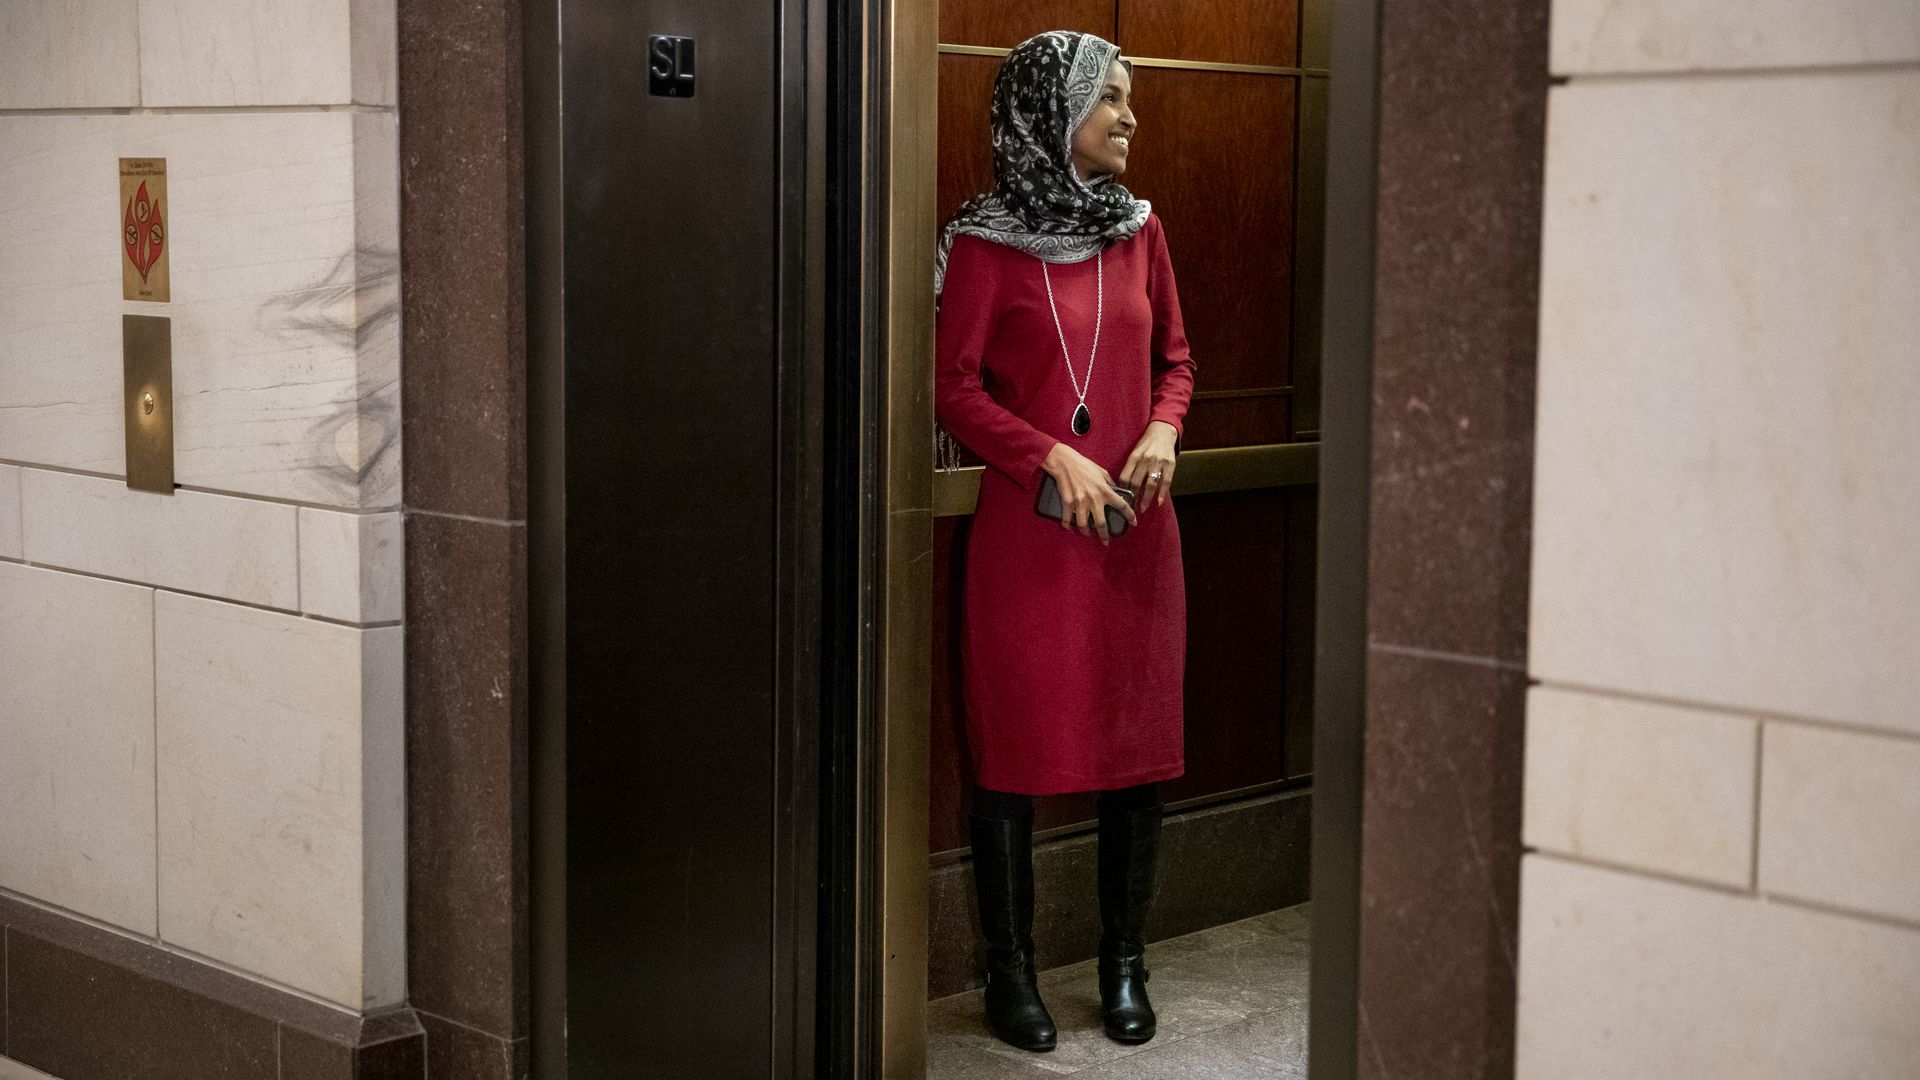 Rep. Ilhan Omar is seen standing in an elevator in the U.S. Capitol.